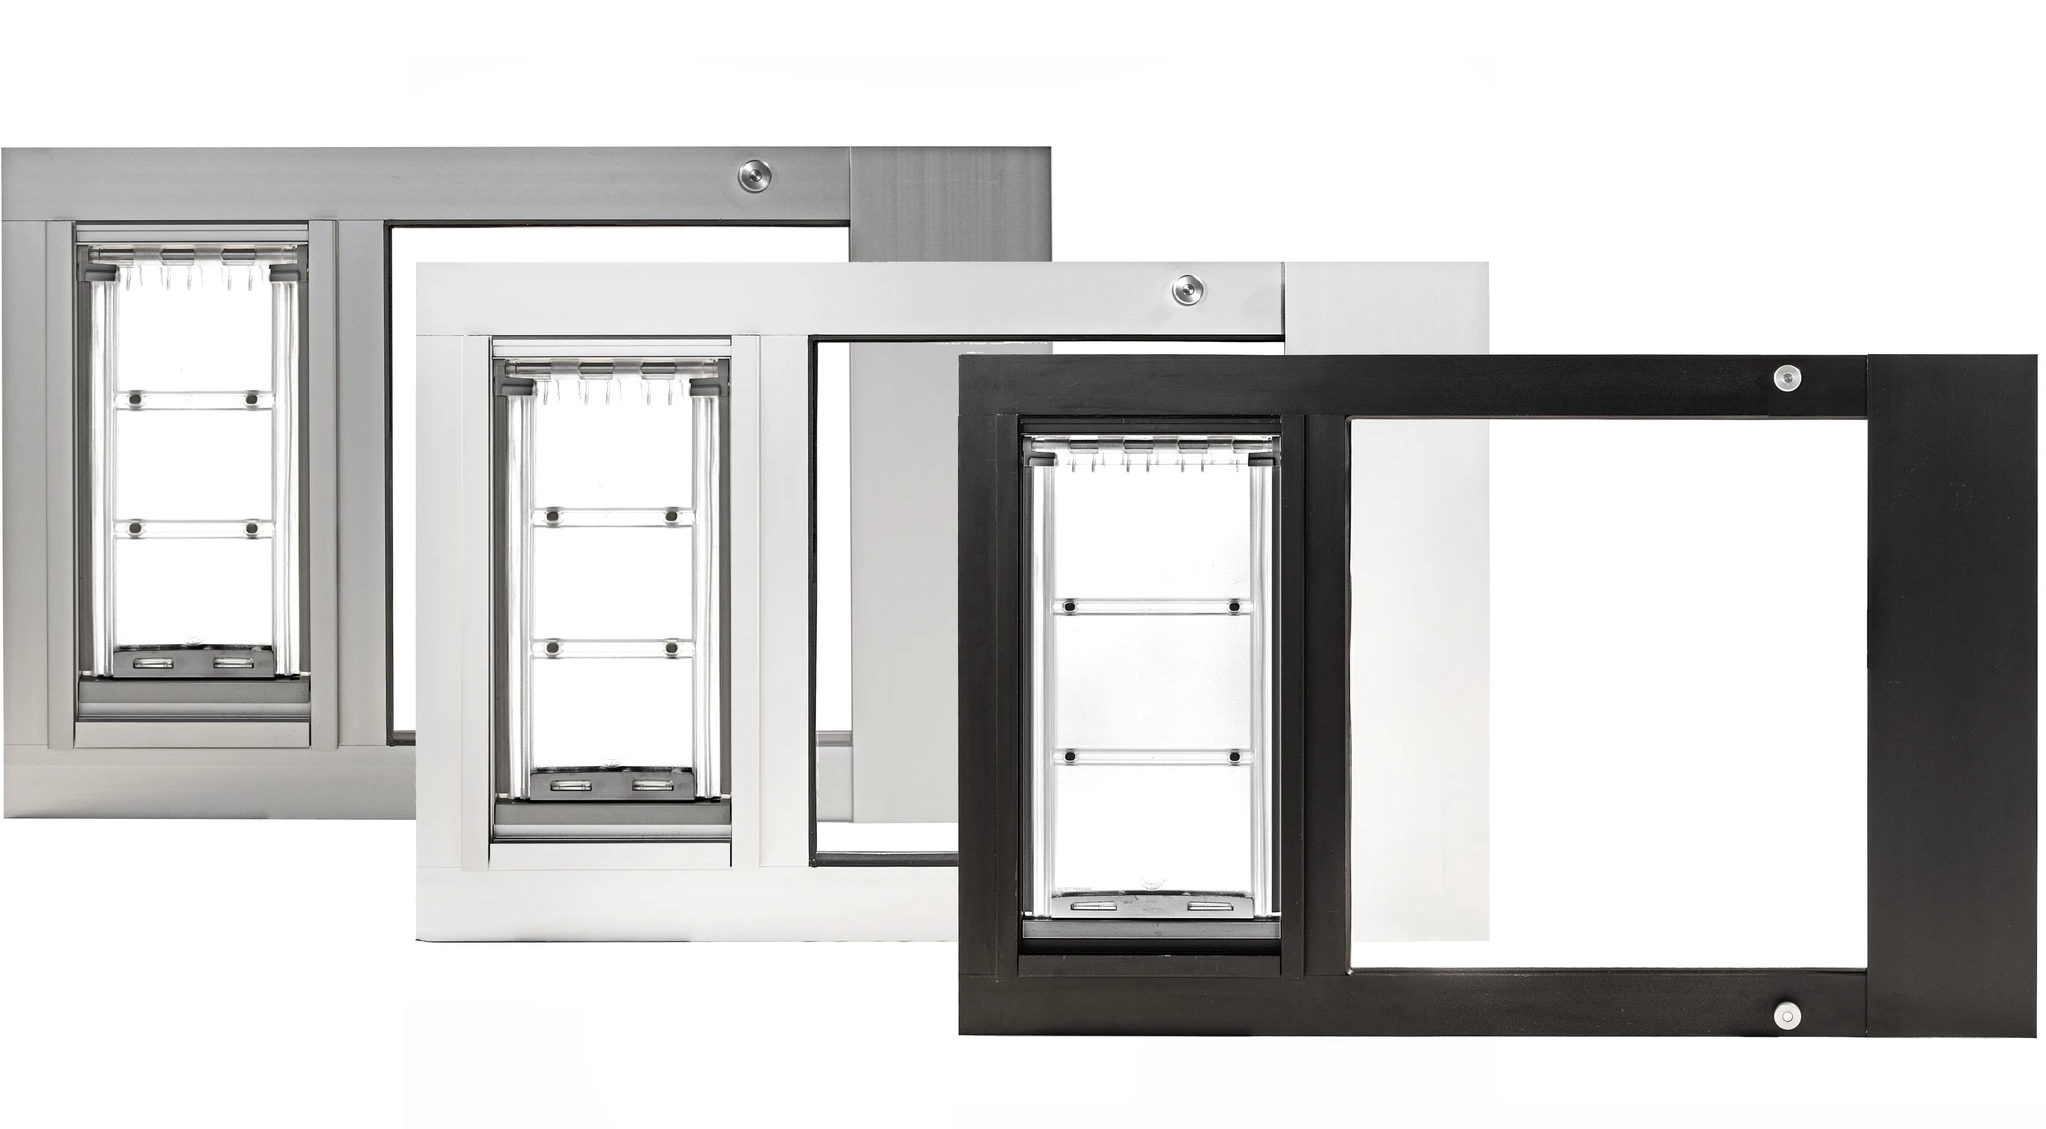 The Endura Flap Thermo Sash Pet Door in white, bronze, and brushed aluminum